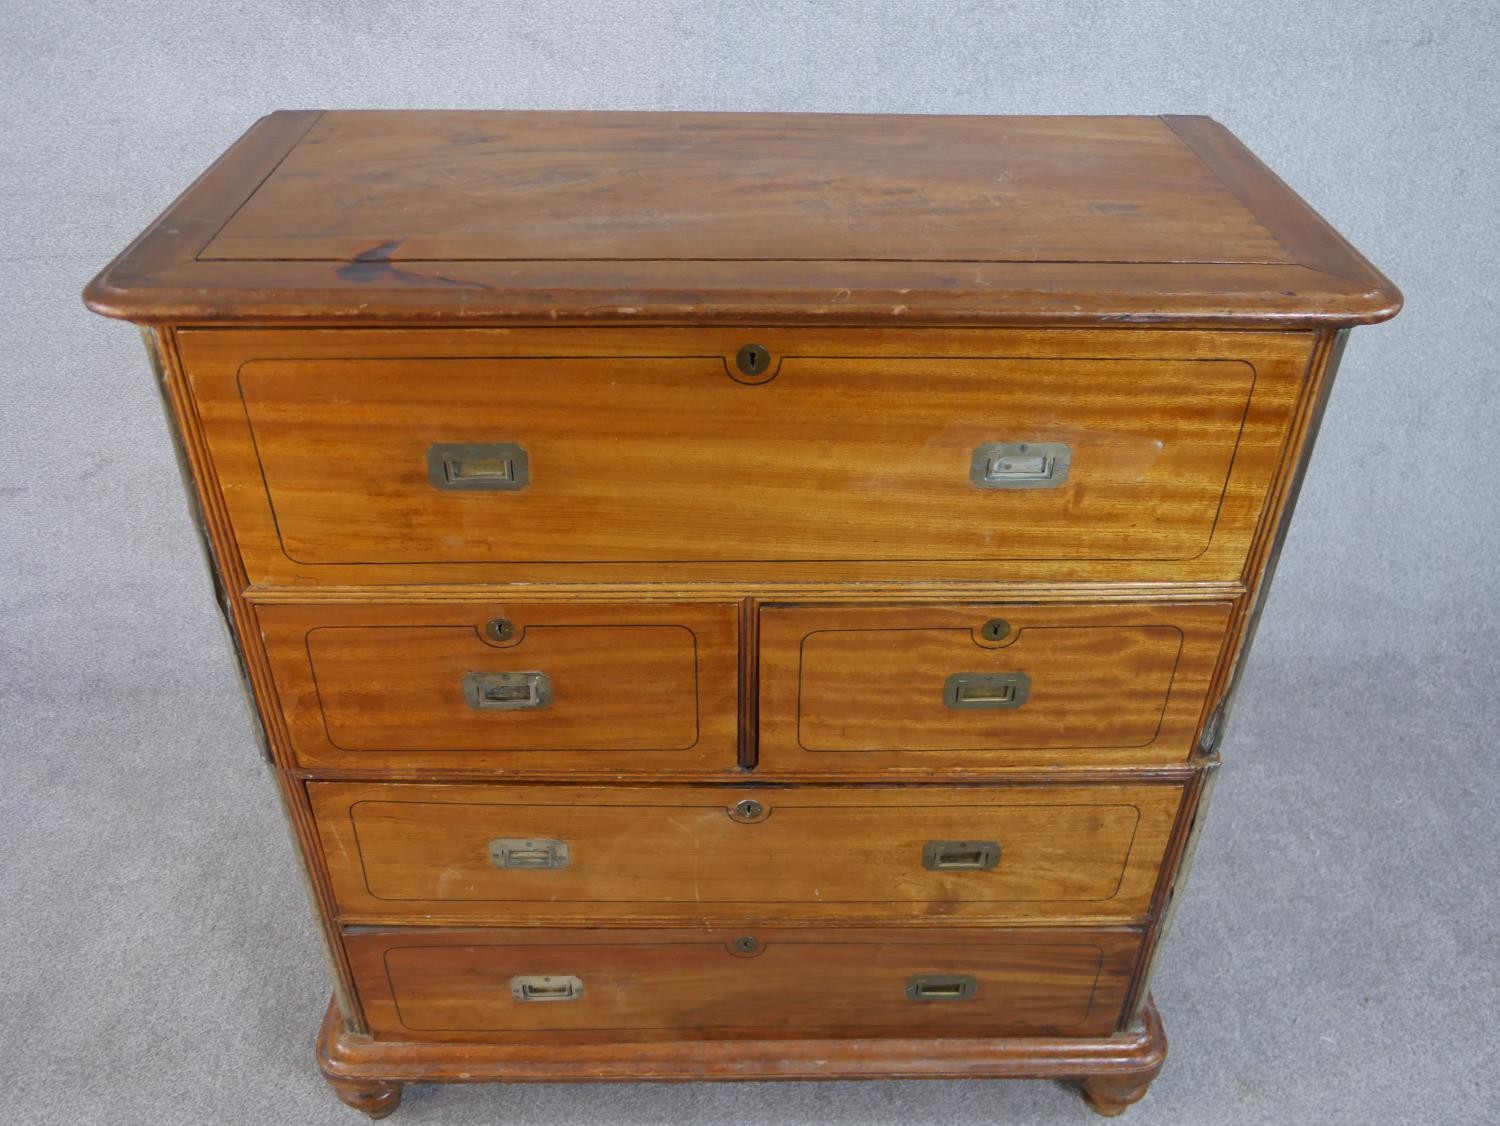 A 19th century camphorwood secretaire campaign chest, in two sections, with a secretaire drawer - Image 2 of 9